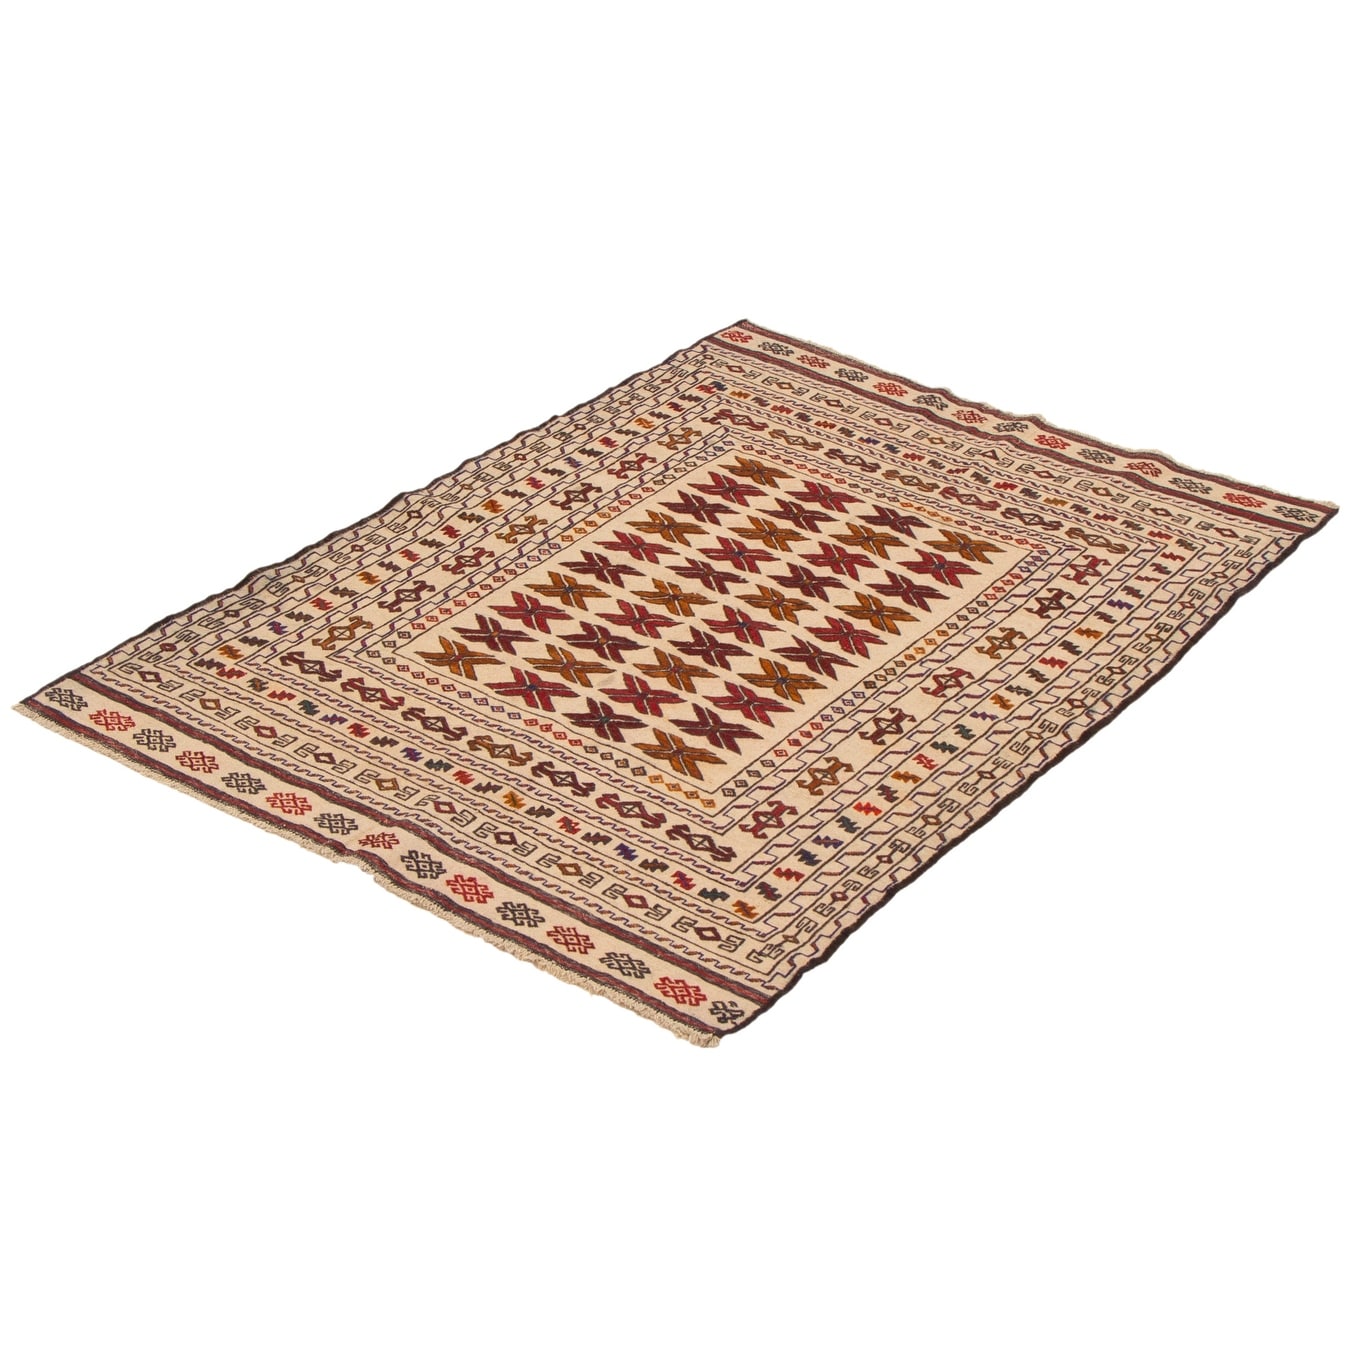 eCarpet Gallery Large Area Rug for Living Room Shiravan SMK Flat-Weaves & Kilims Yellow Tapestry Kilim 6'8 x 9'5 Hand-Knotted Wool Rug Bedroom 354021